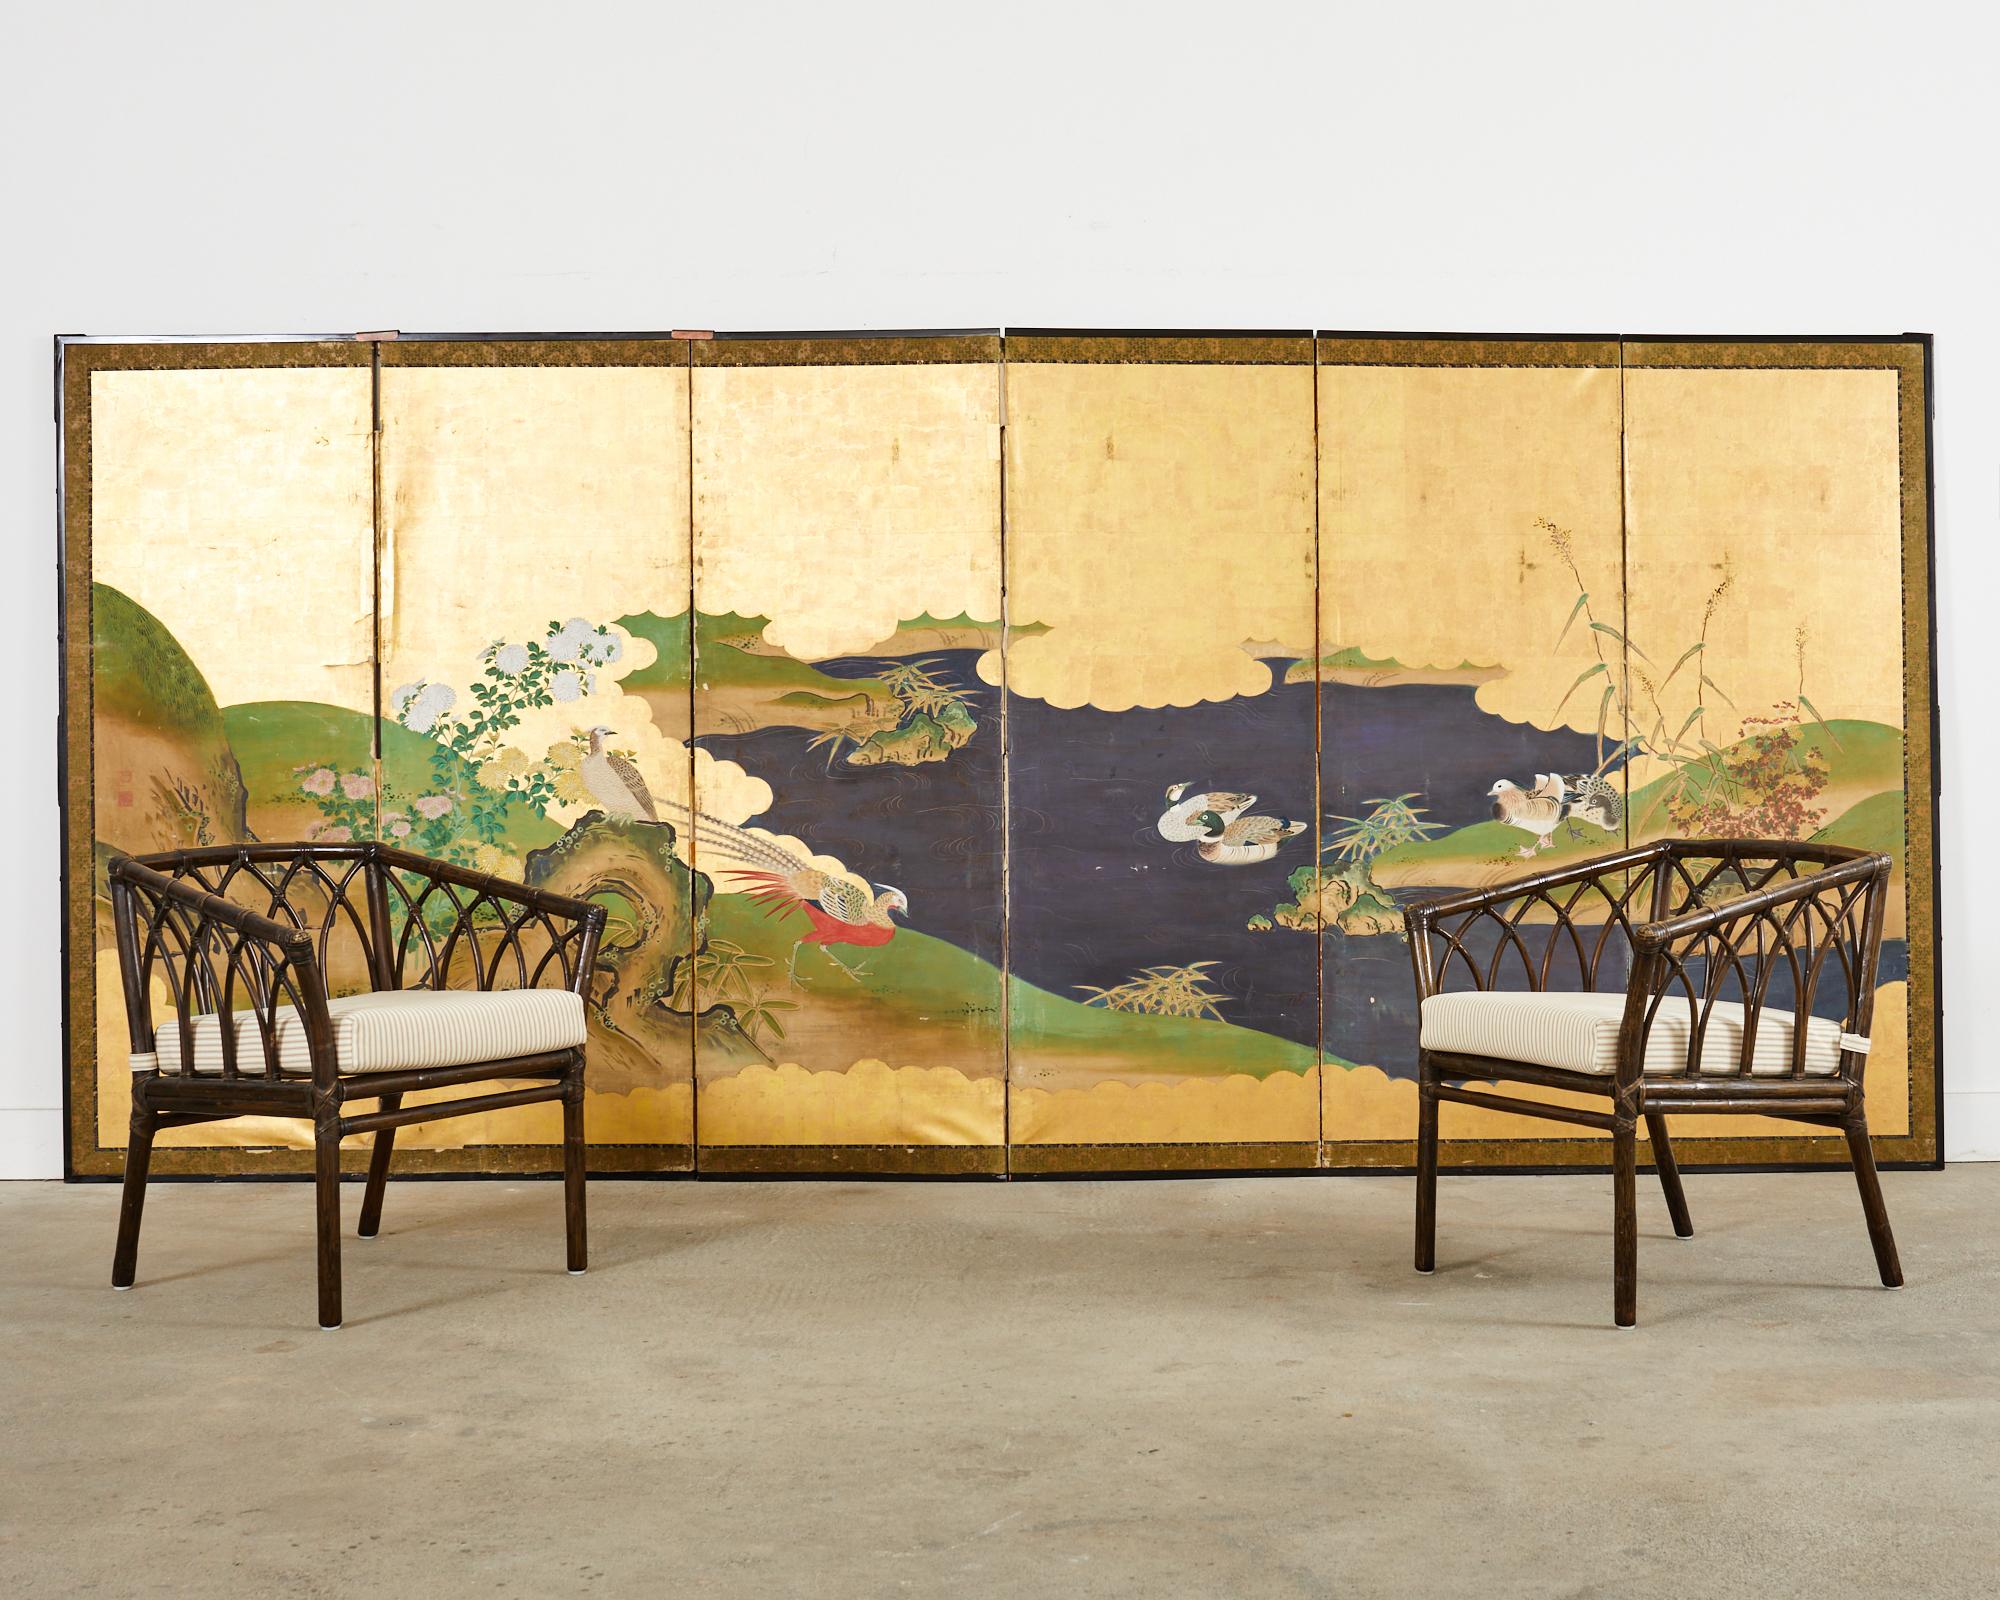 Stunning late 19th century Japanese Meiji period six panel byobu screen featuring a deep blue waterscape with pheasants and ducks. Made in the Kano school style with natural ink and color pigments over a dramatic gold leaf square ground. The